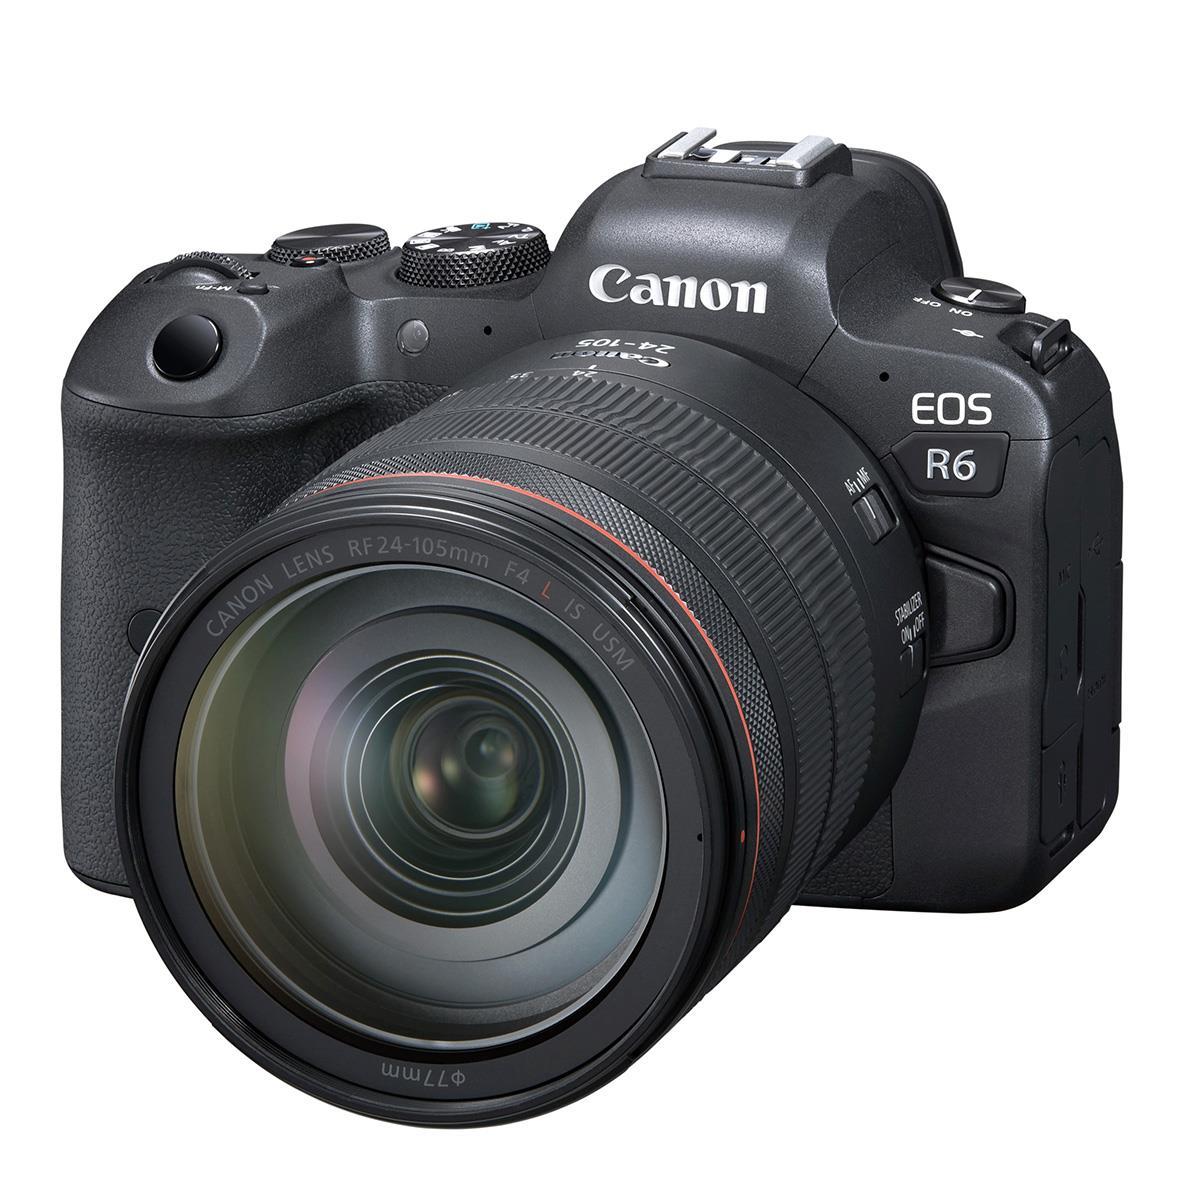 Image of Canon EOS R6 Mirrorless Camera with RF 24-105mm f/4 L IS USM Lens